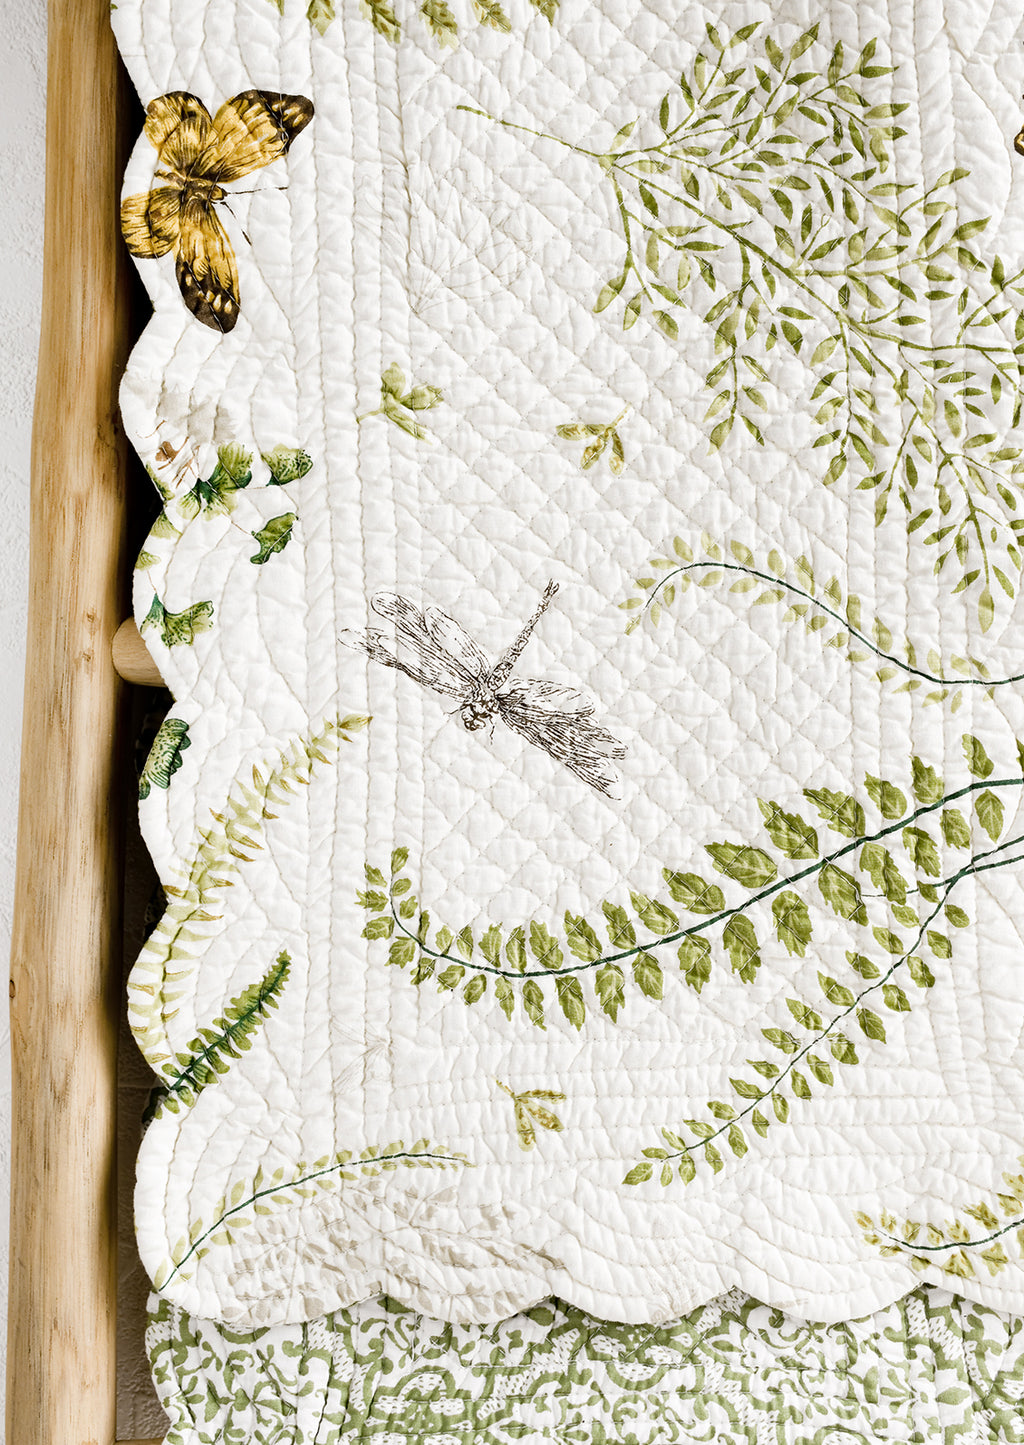 2: A quilted table runner with fern print.